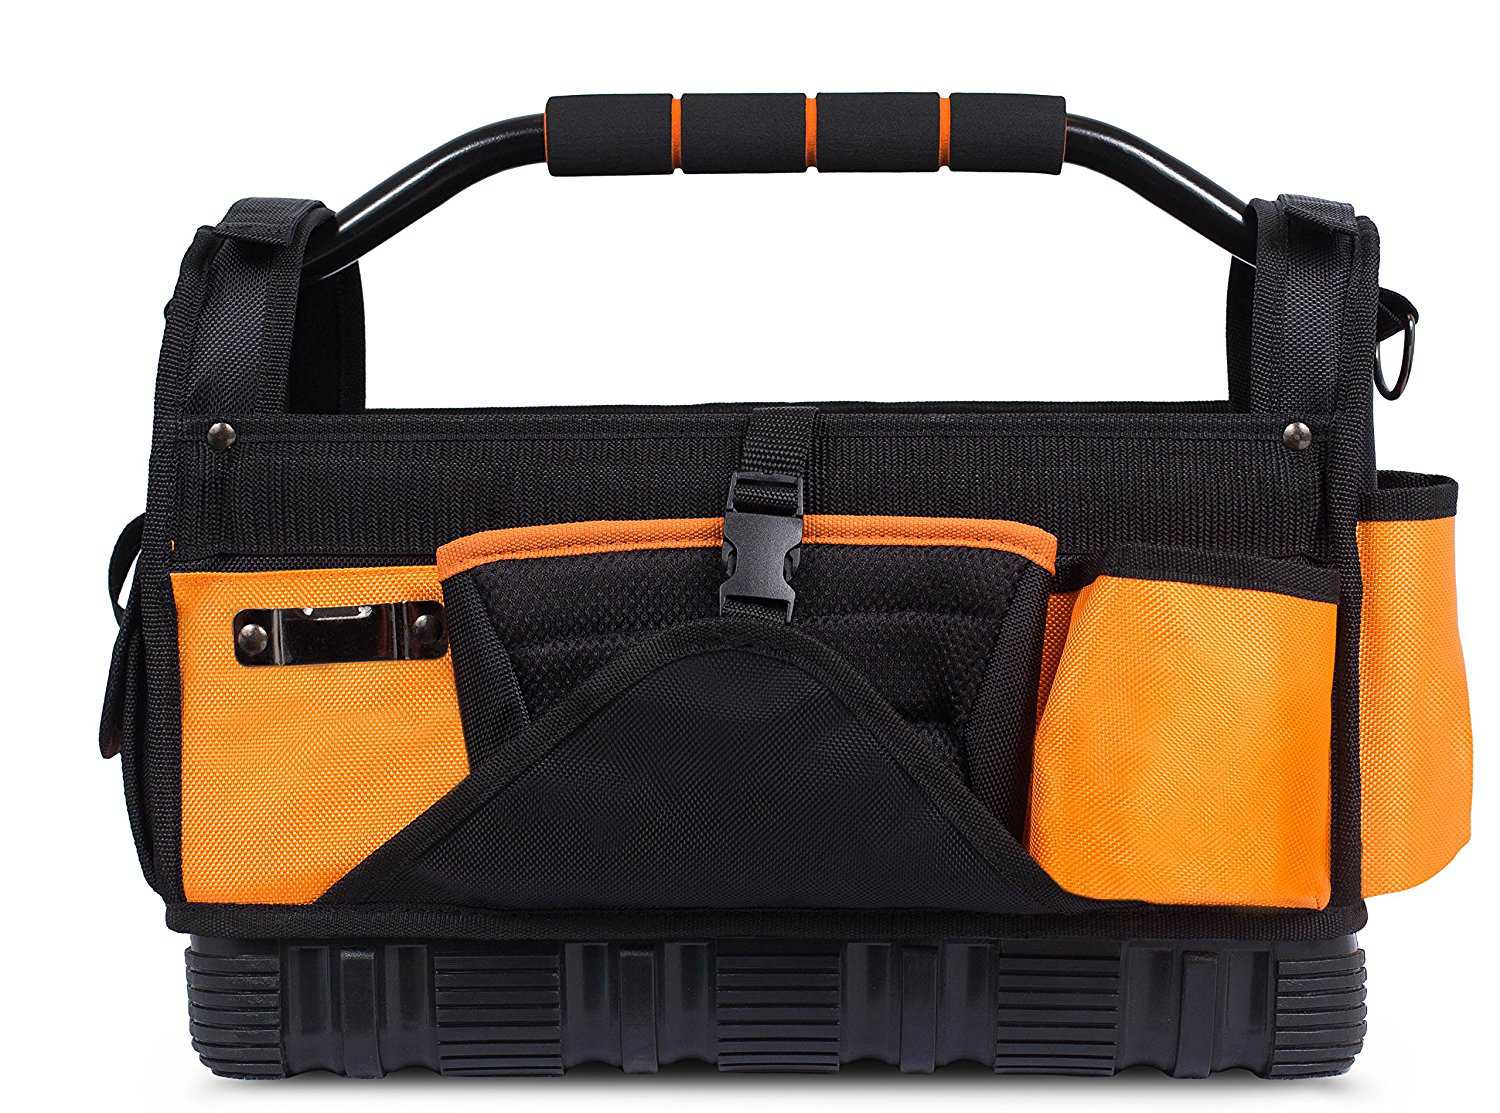 Internet's Best Open Top Tool Bag with Rigid Frame